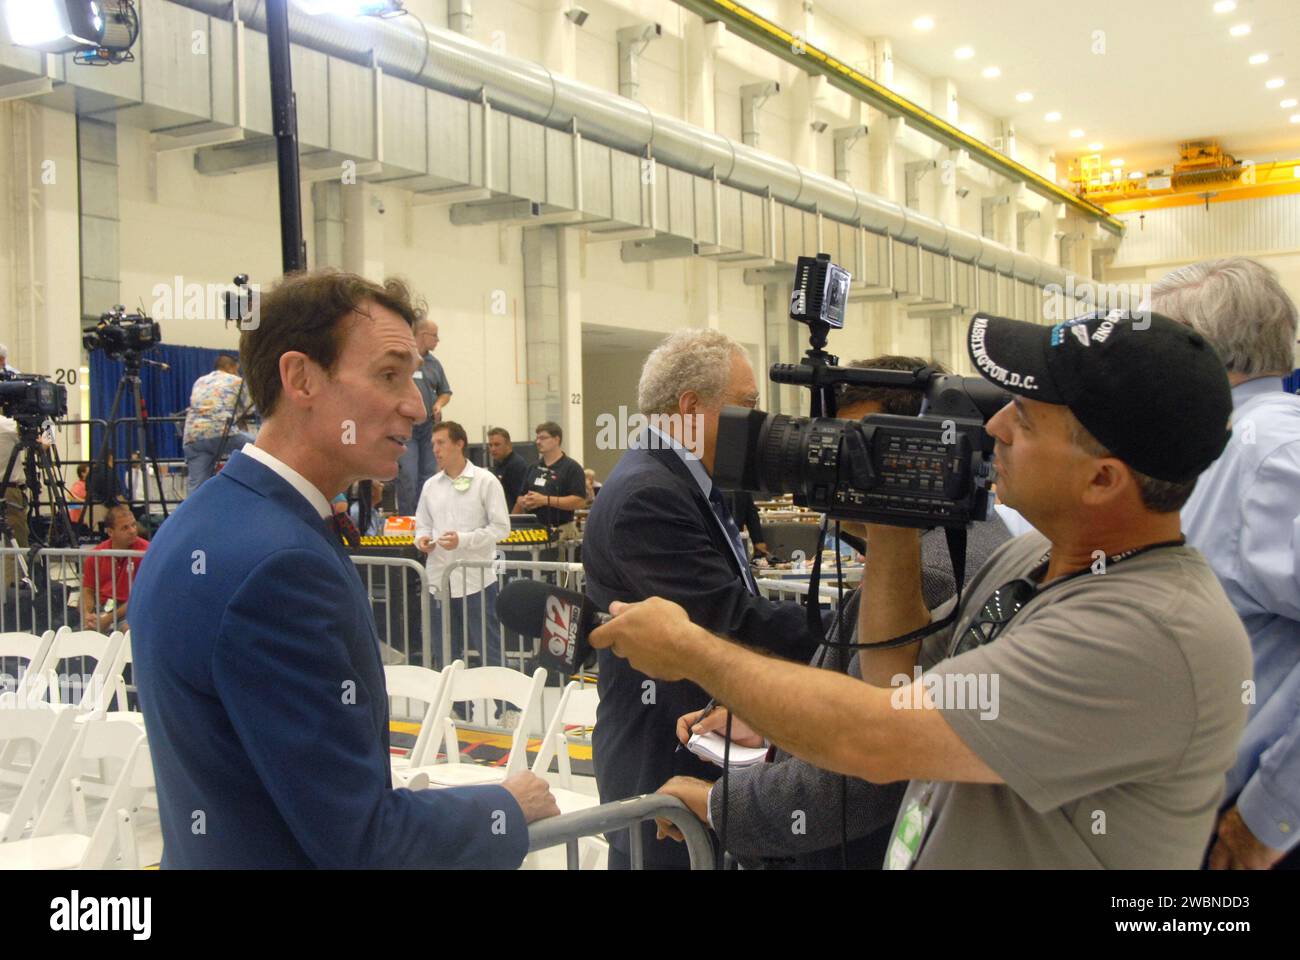 CAPE CANAVERAL, Fla. - In the Operations and Checkout Building at NASA's Kennedy Space Center in Florida, Bill Nye The Science Guy, engineer and television personality, is interviewed by the media during the Conference on the American Space Program for the 21st Century. President Barack Obama opened the Conference on the American Space Program for the 21st Century with remarks on the new course his administration is charting for NASA and the future of U.S. leadership in human spaceflight. Stock Photo